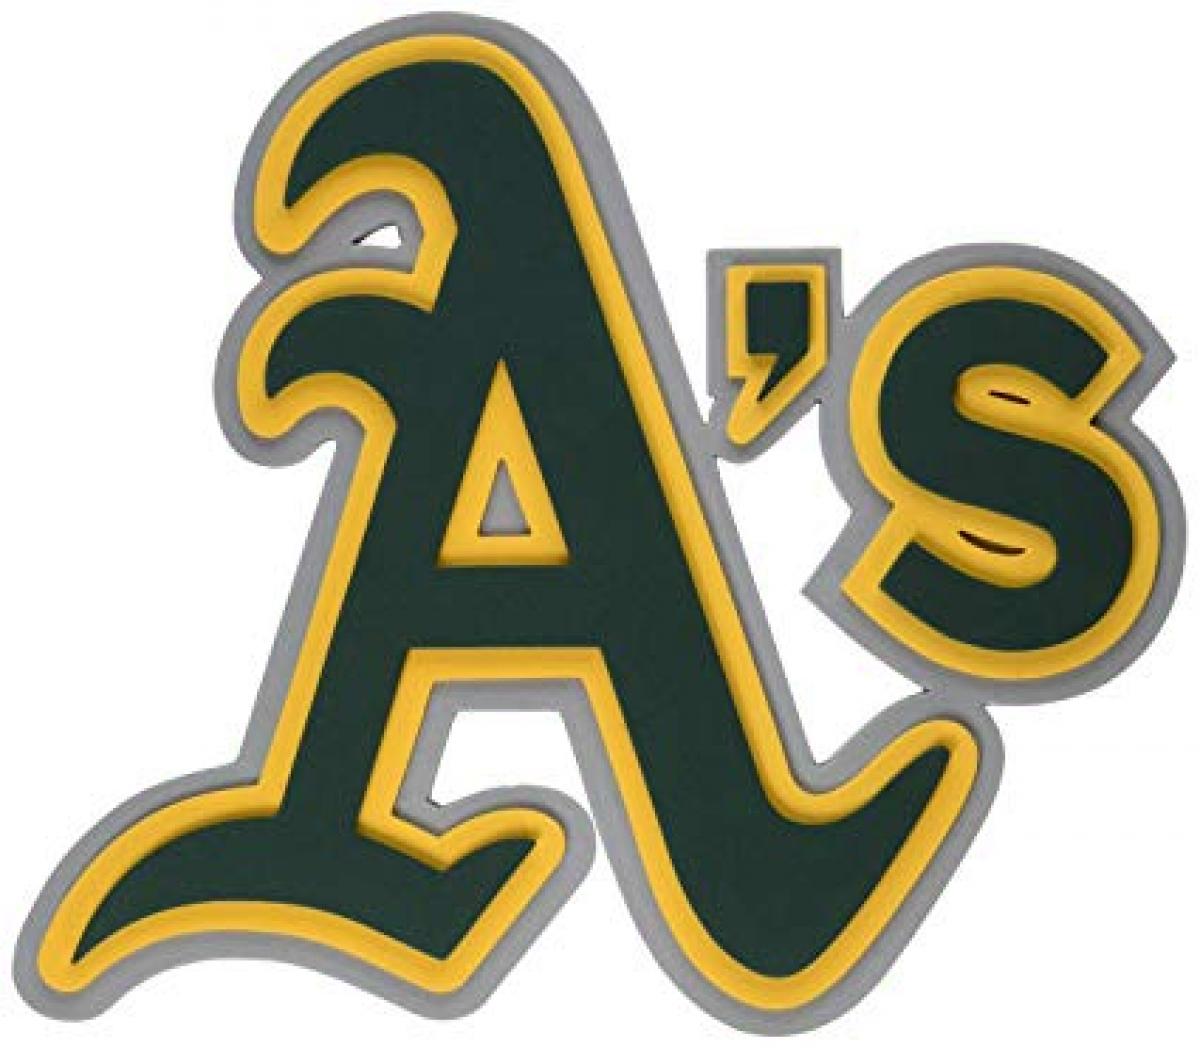 A’s bounce back to .500